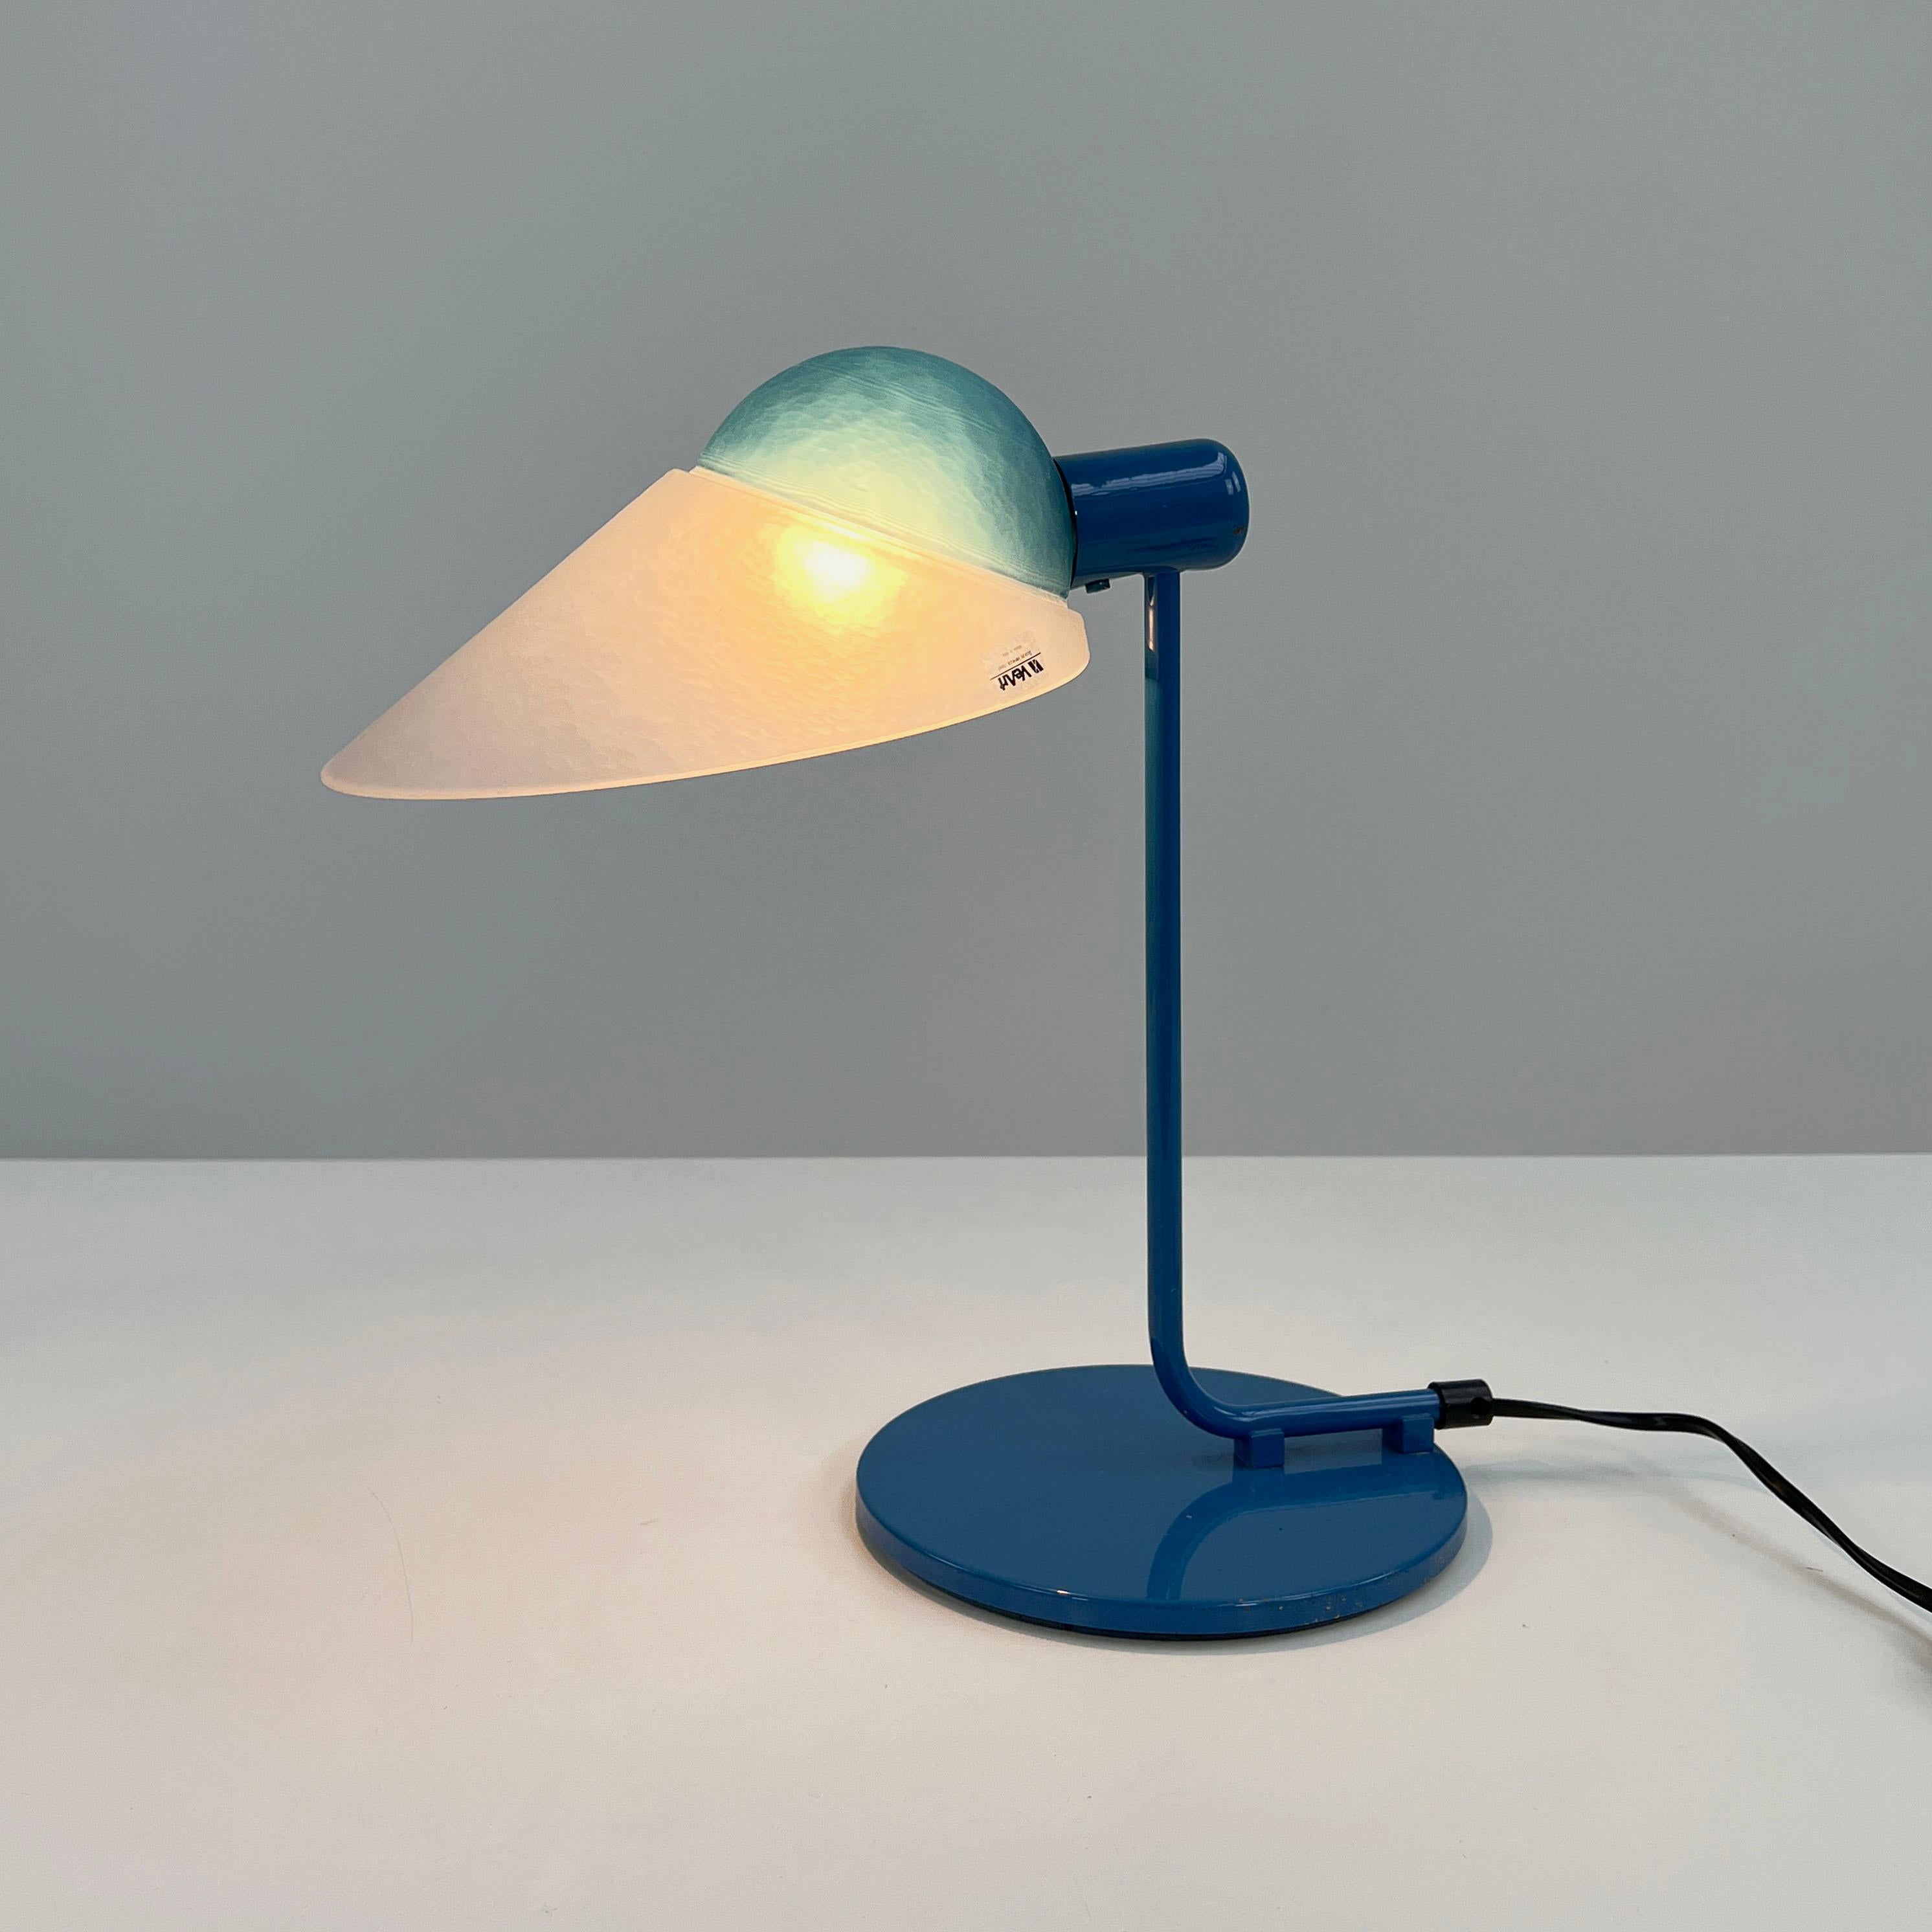 Blue table lamp in glass & metal from VeArt, 1980s
Producer - VeArt
Design Period - Eighties
Measurements - Width 18 cm x Depth 18 cm x Height 34 cm
Materials - Metal, glass
Color - Blue, white
Light wear consistent with age and use.